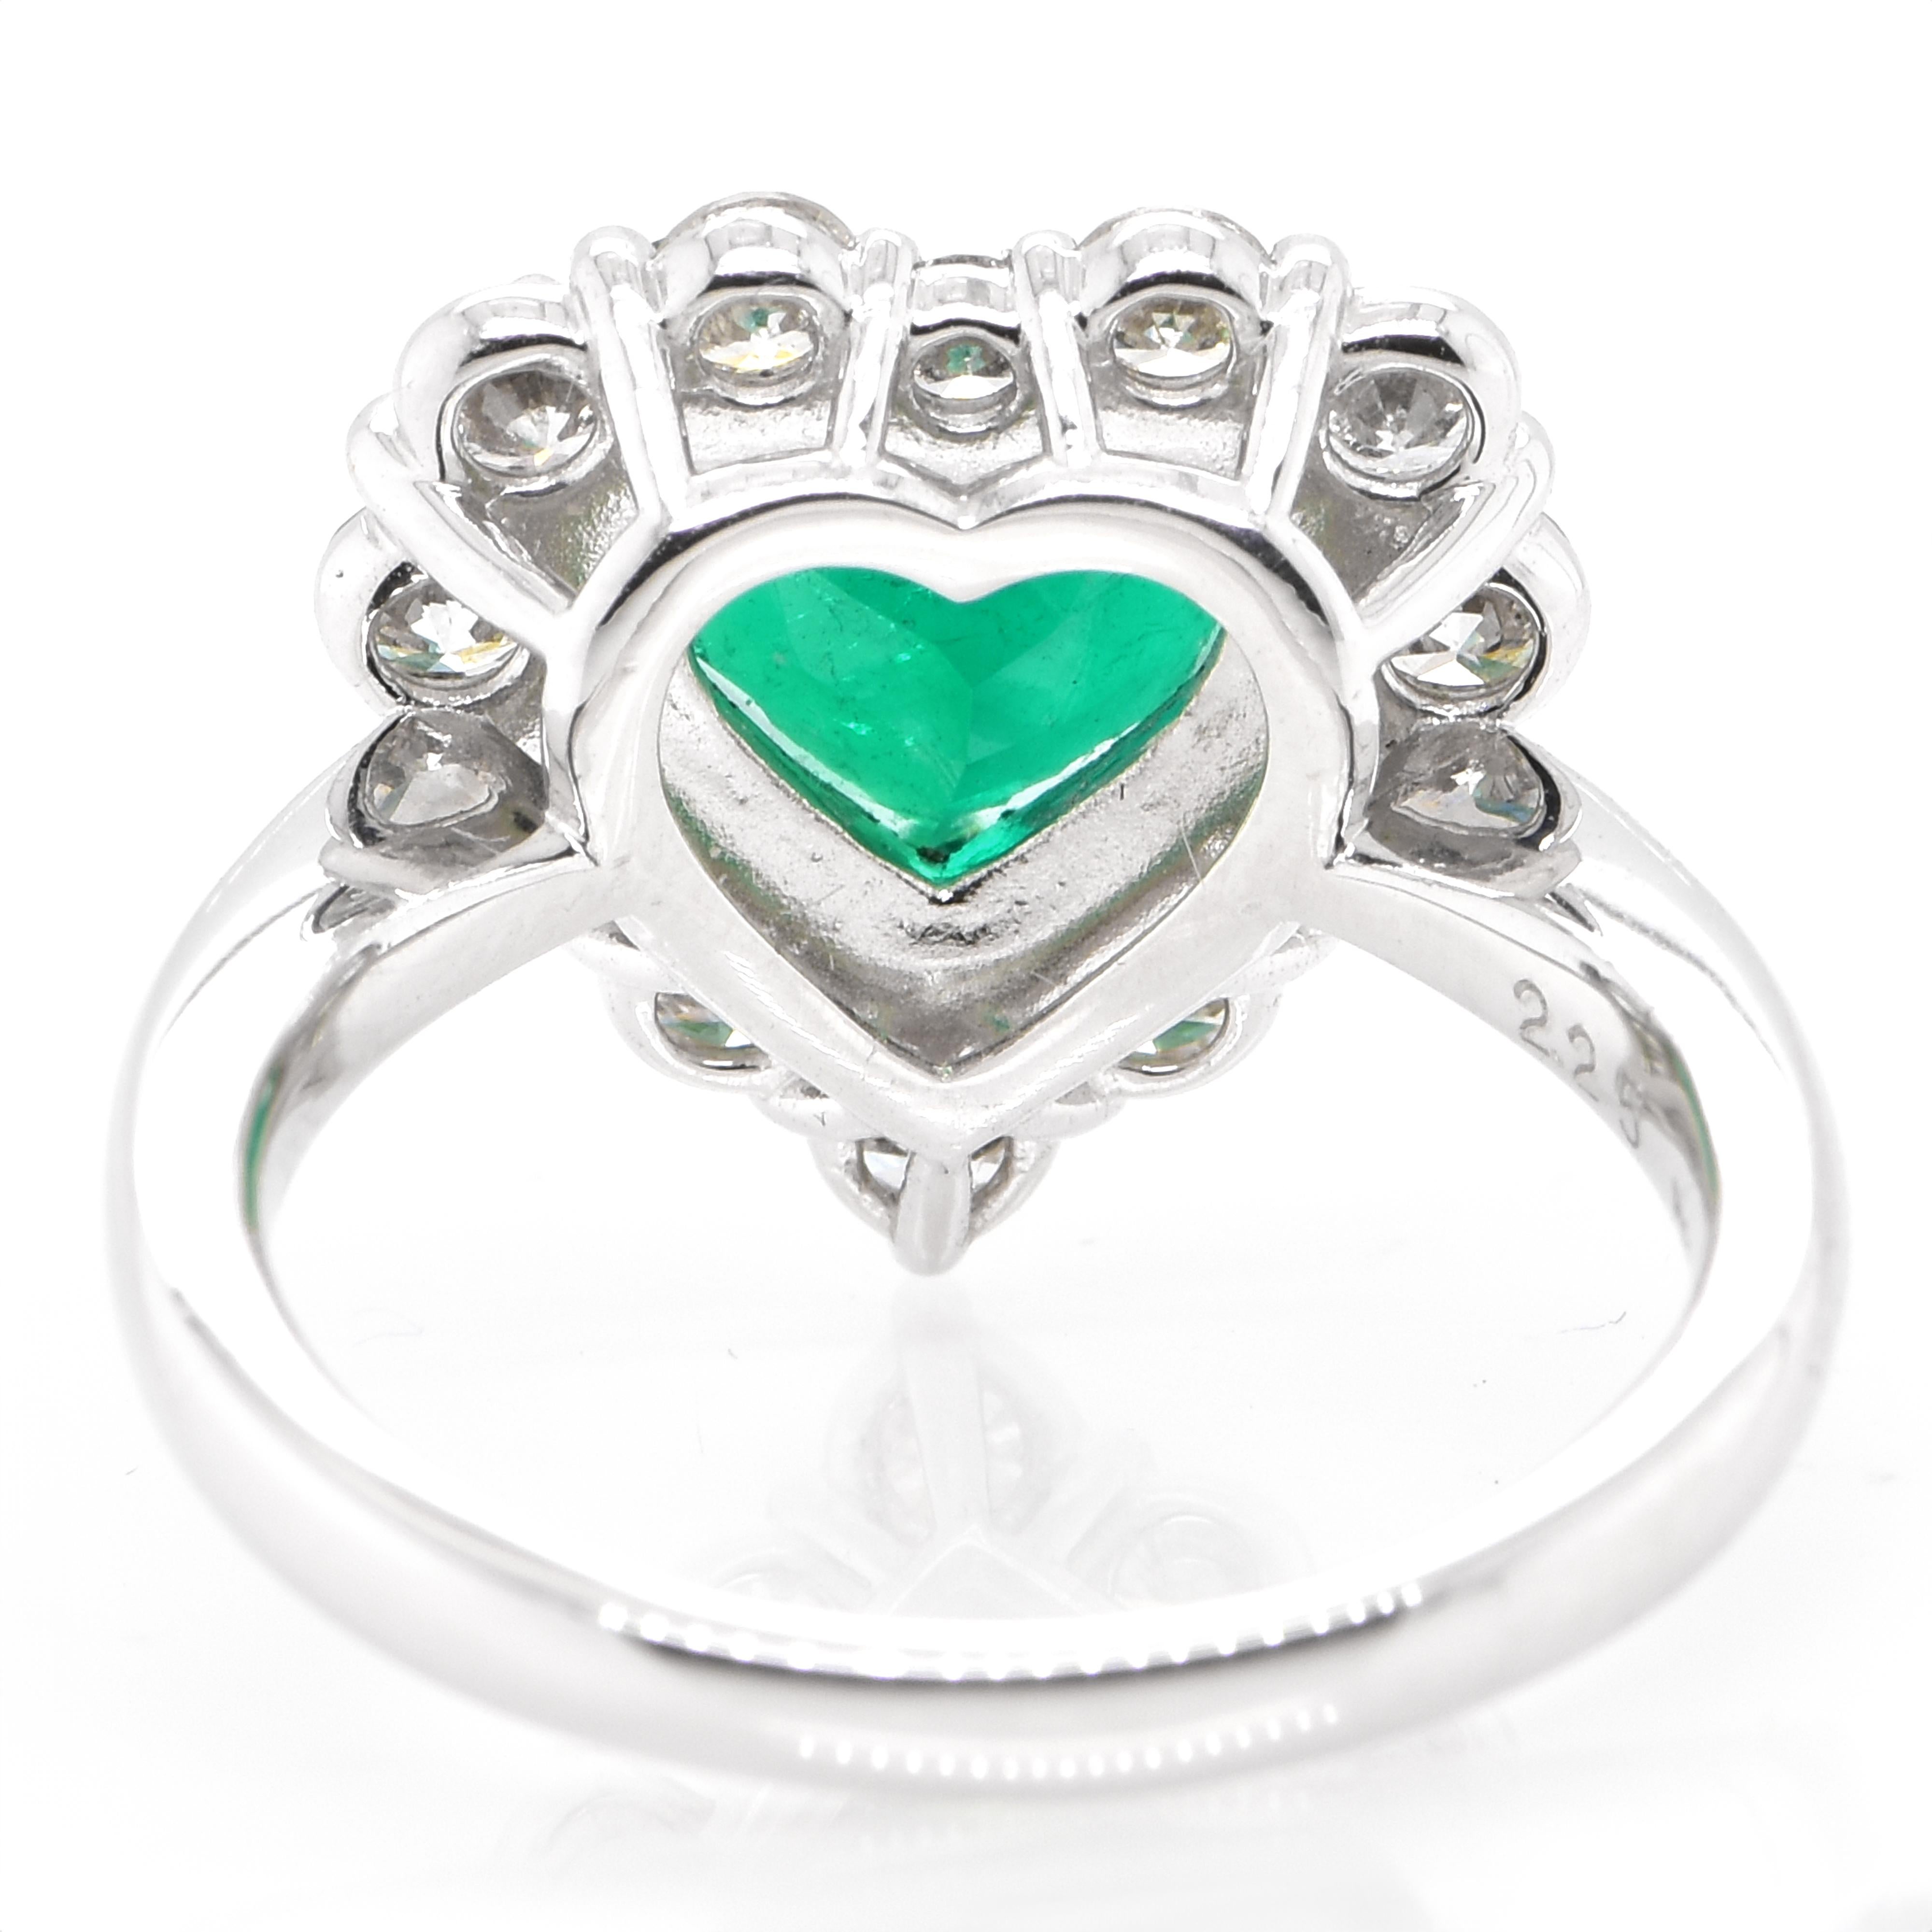 Women's GIA Certified 2.25 Carat Heart Shape Colombian Emerald Ring Set in Platinum For Sale